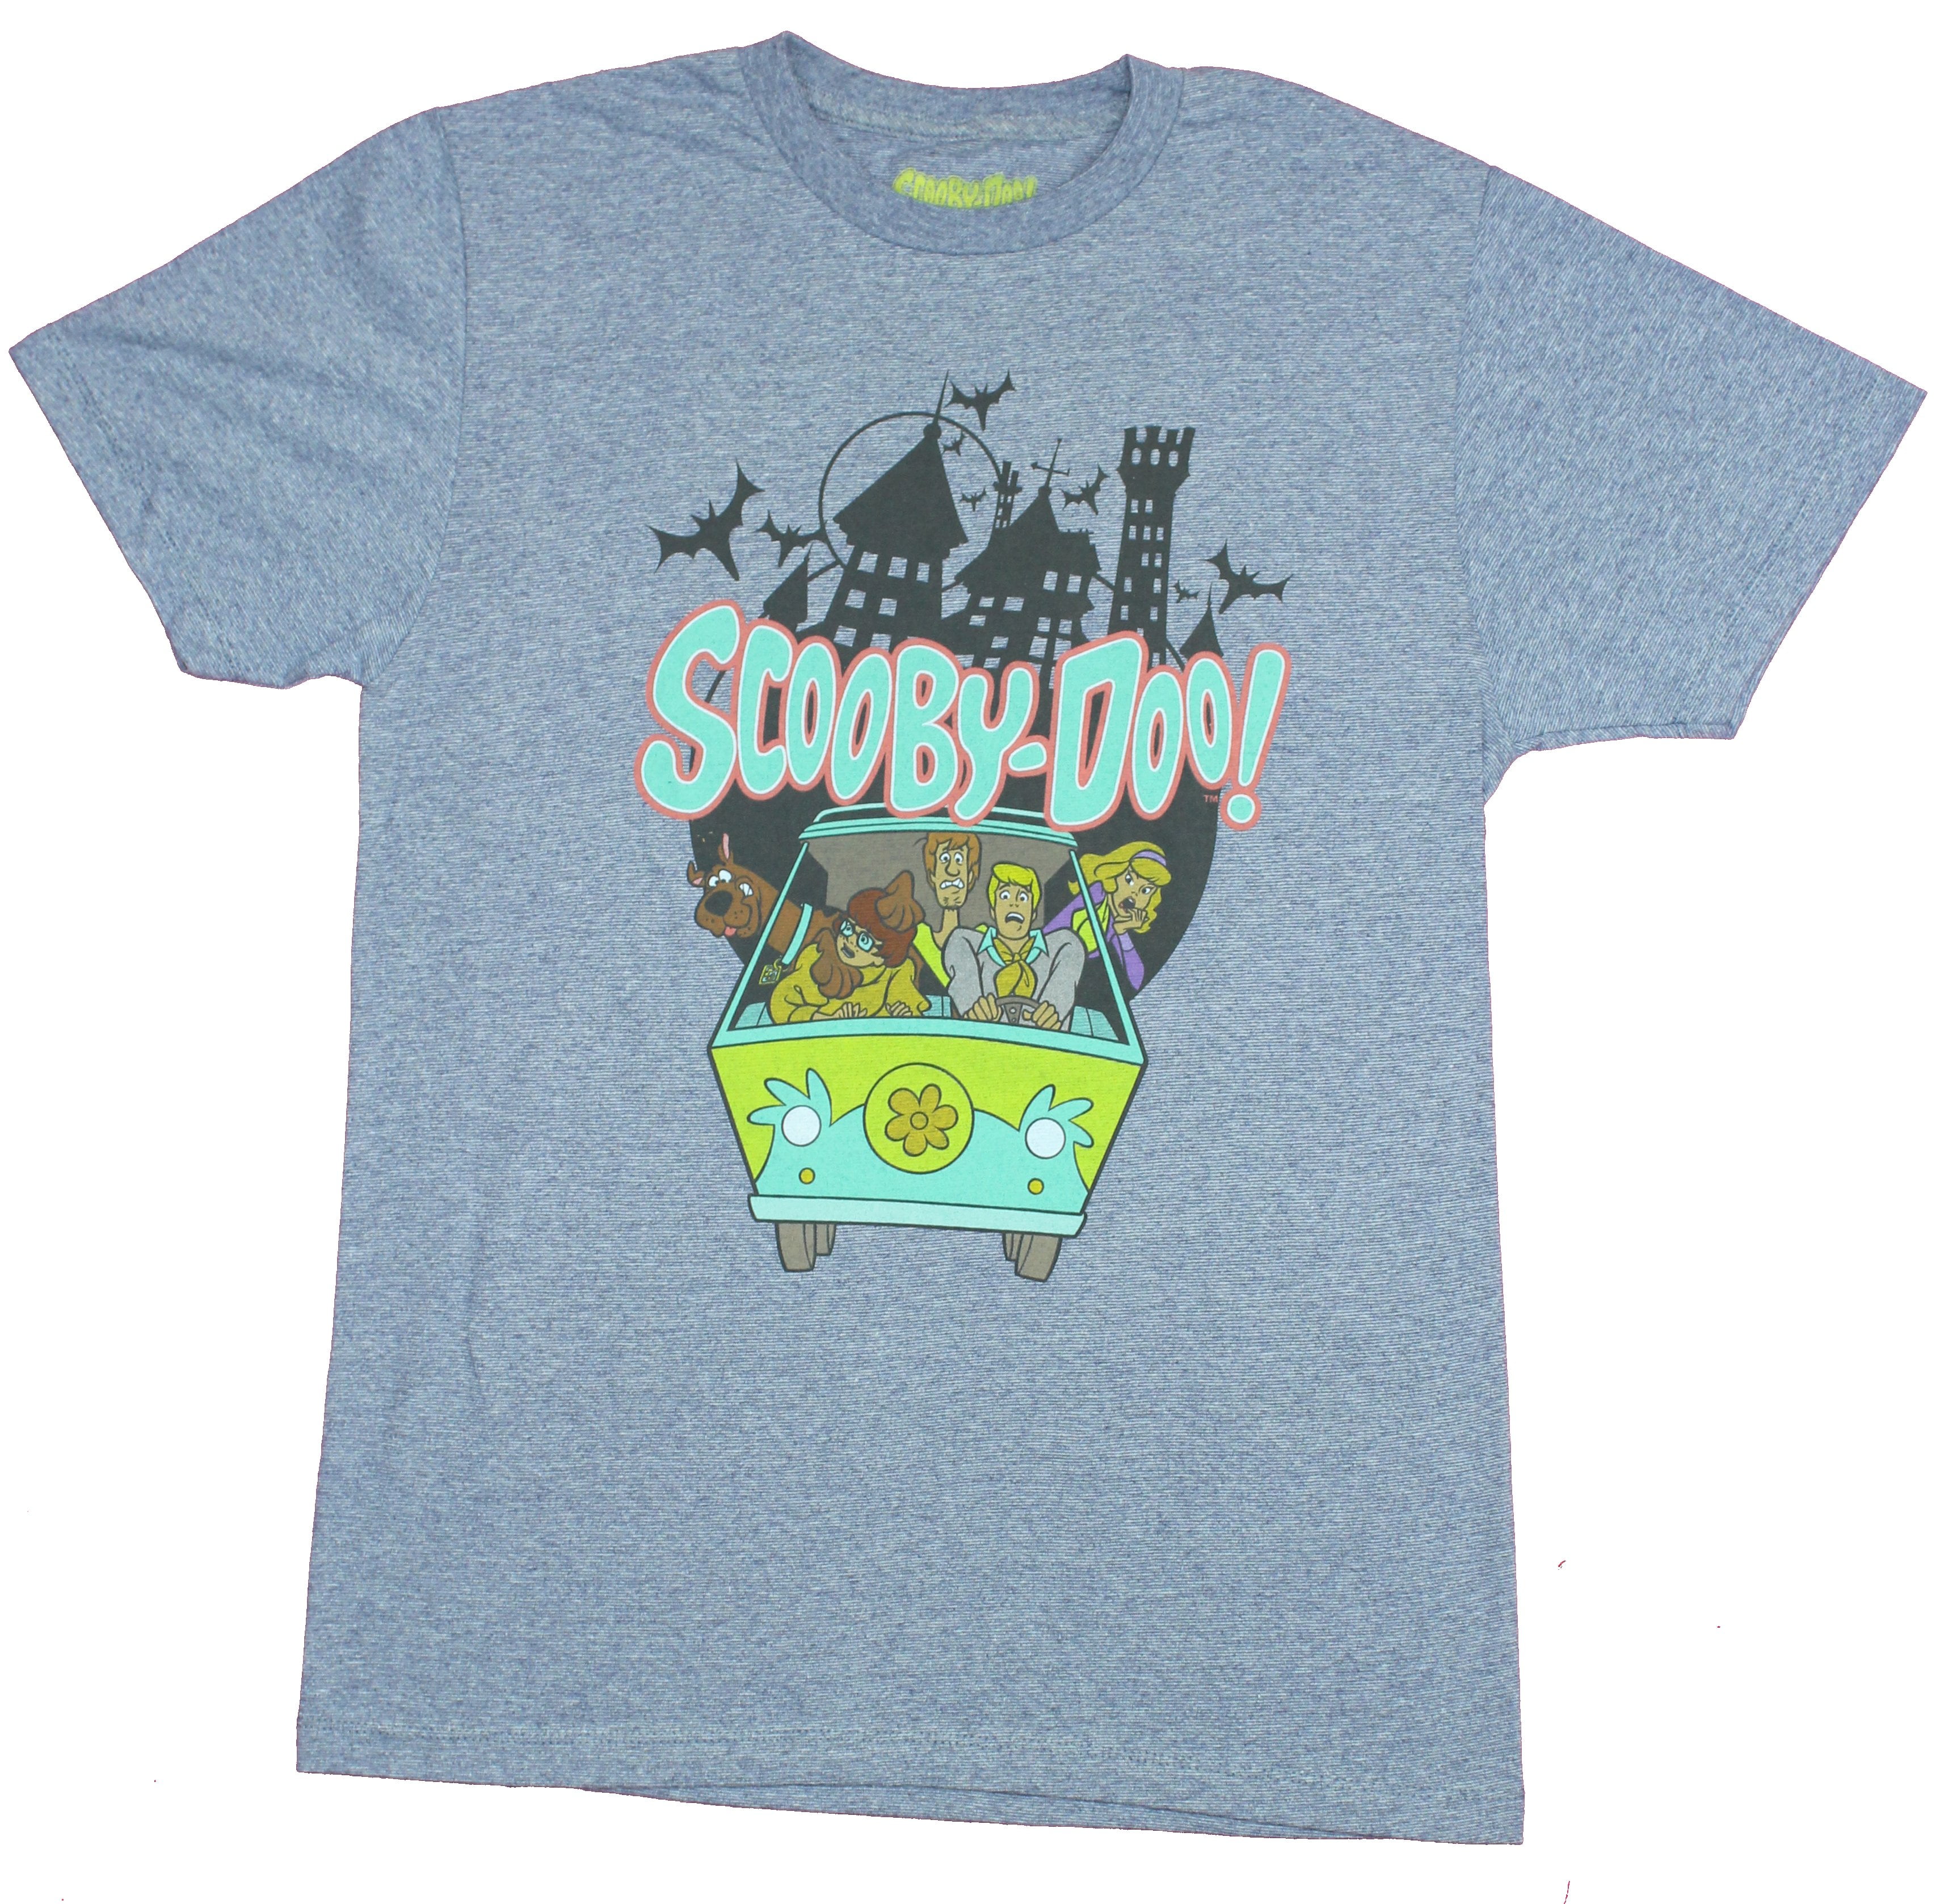 Hybrid Apparel - Scooby Doo Mens T-Shirt - Full Gang Loaded in the ...